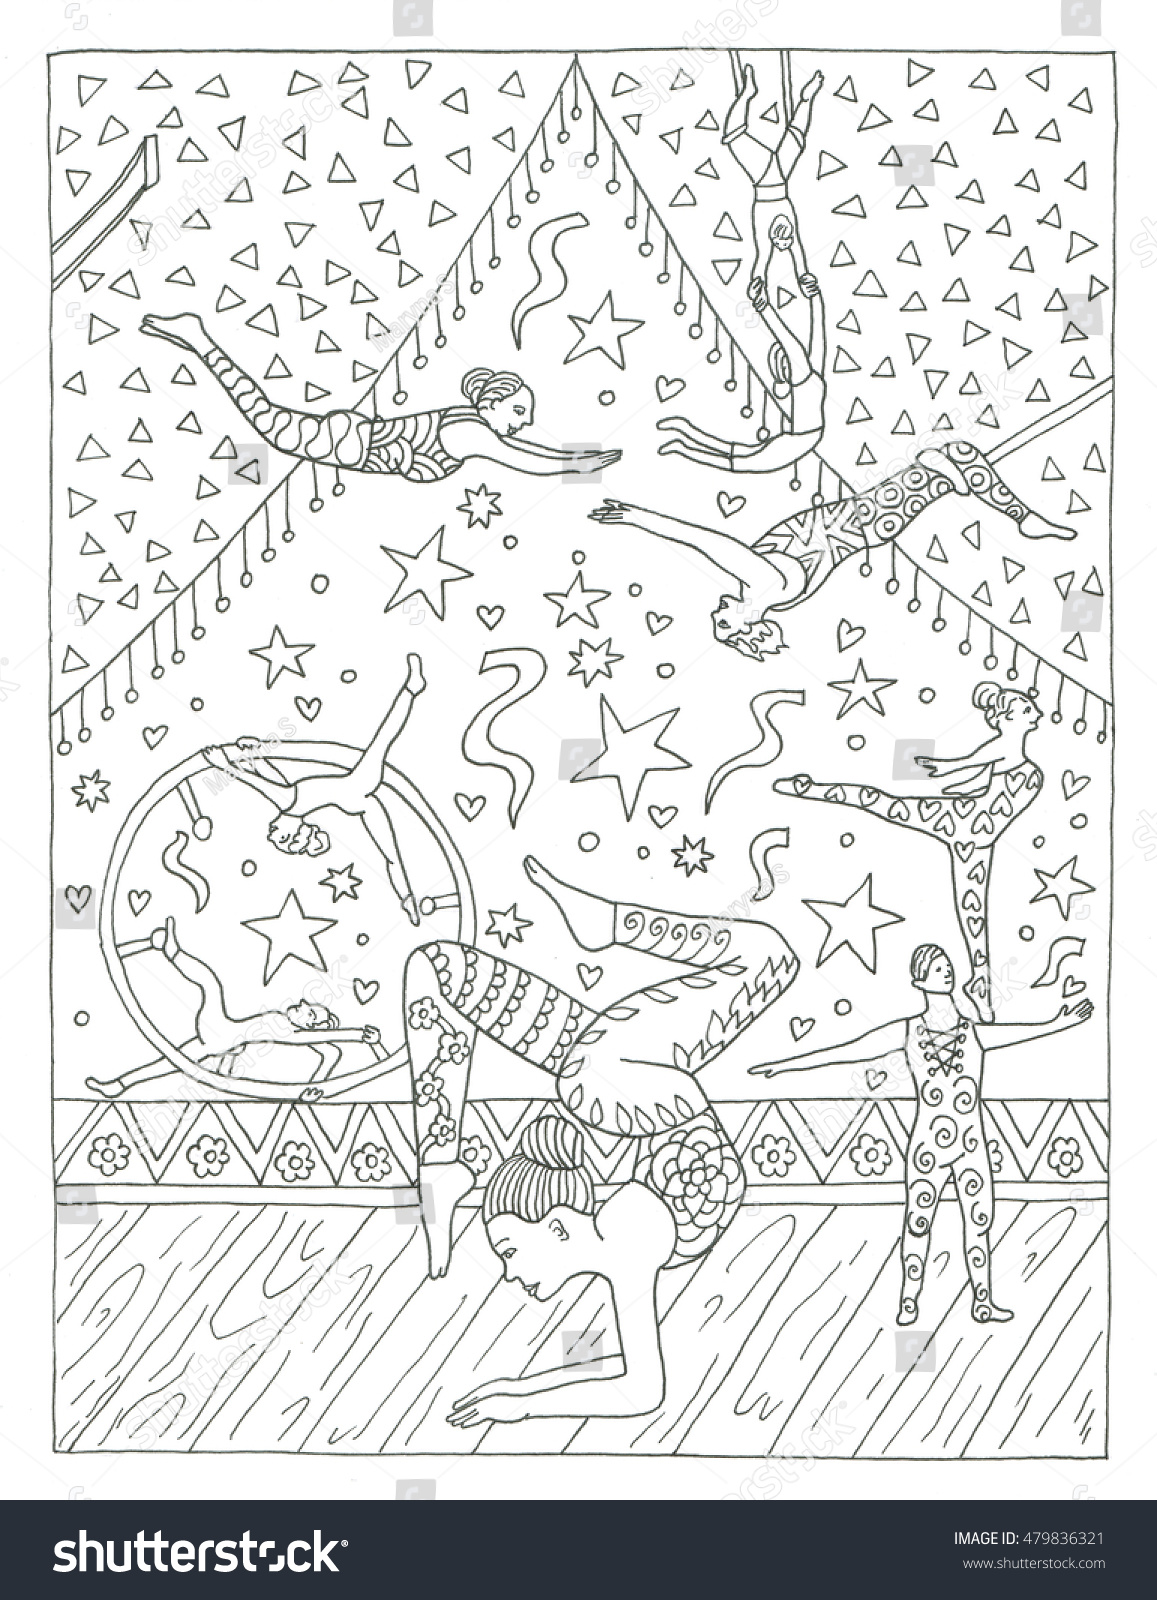 Trapeze Artists Circus Coloring Page Stock Illustration 479836321